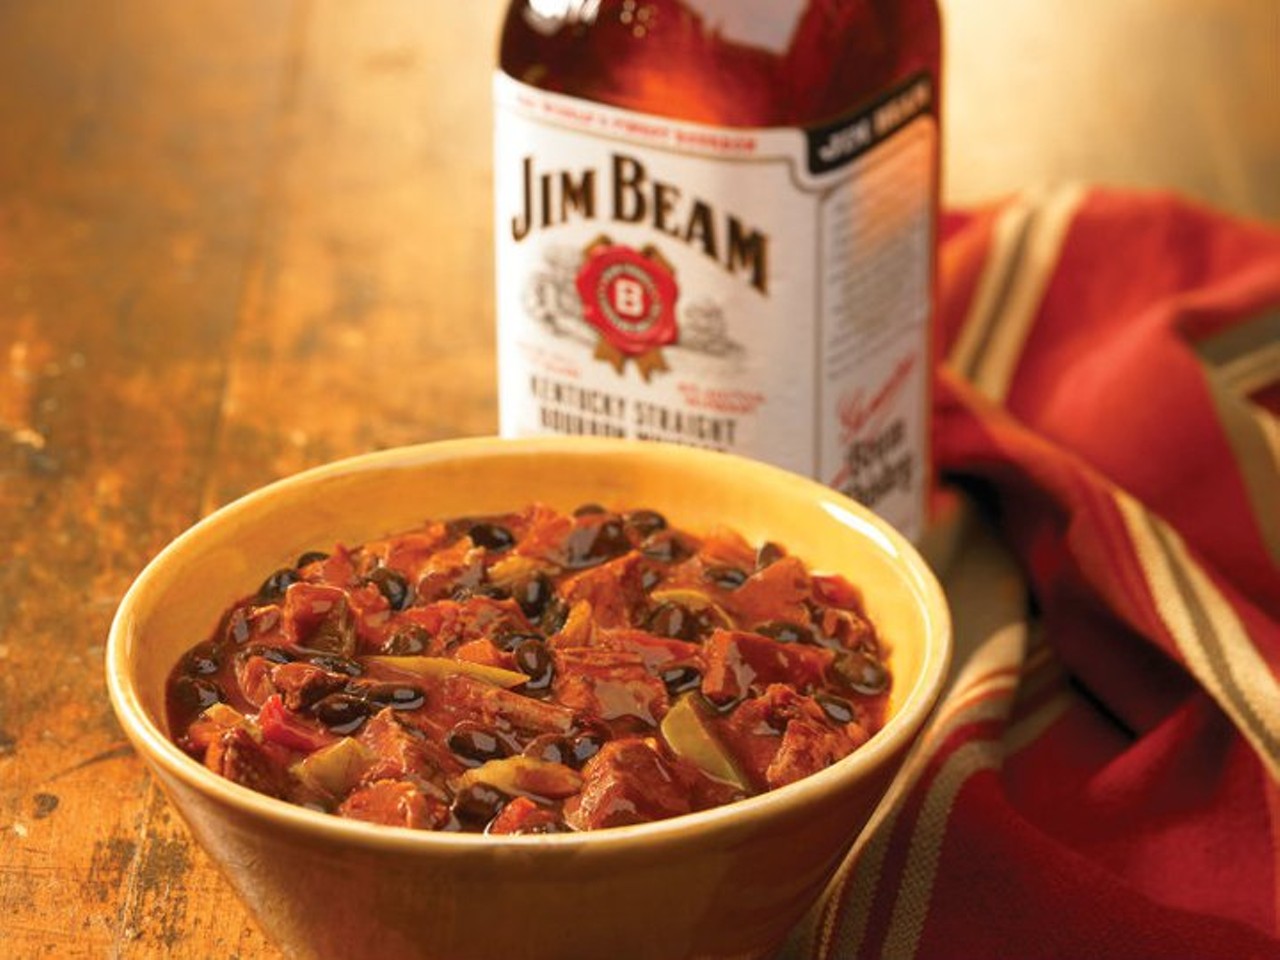 This landmark chili destination restaurant adds tender steak and Jim Beam to its legendary chili recipe. No matter what the temperature is outside this hearty soup is a winner. Whitey's Chili is located at 3600 Brecksville Rd  Richfield. Call 216-659-3600 or visit whiteyschili.com for more information.